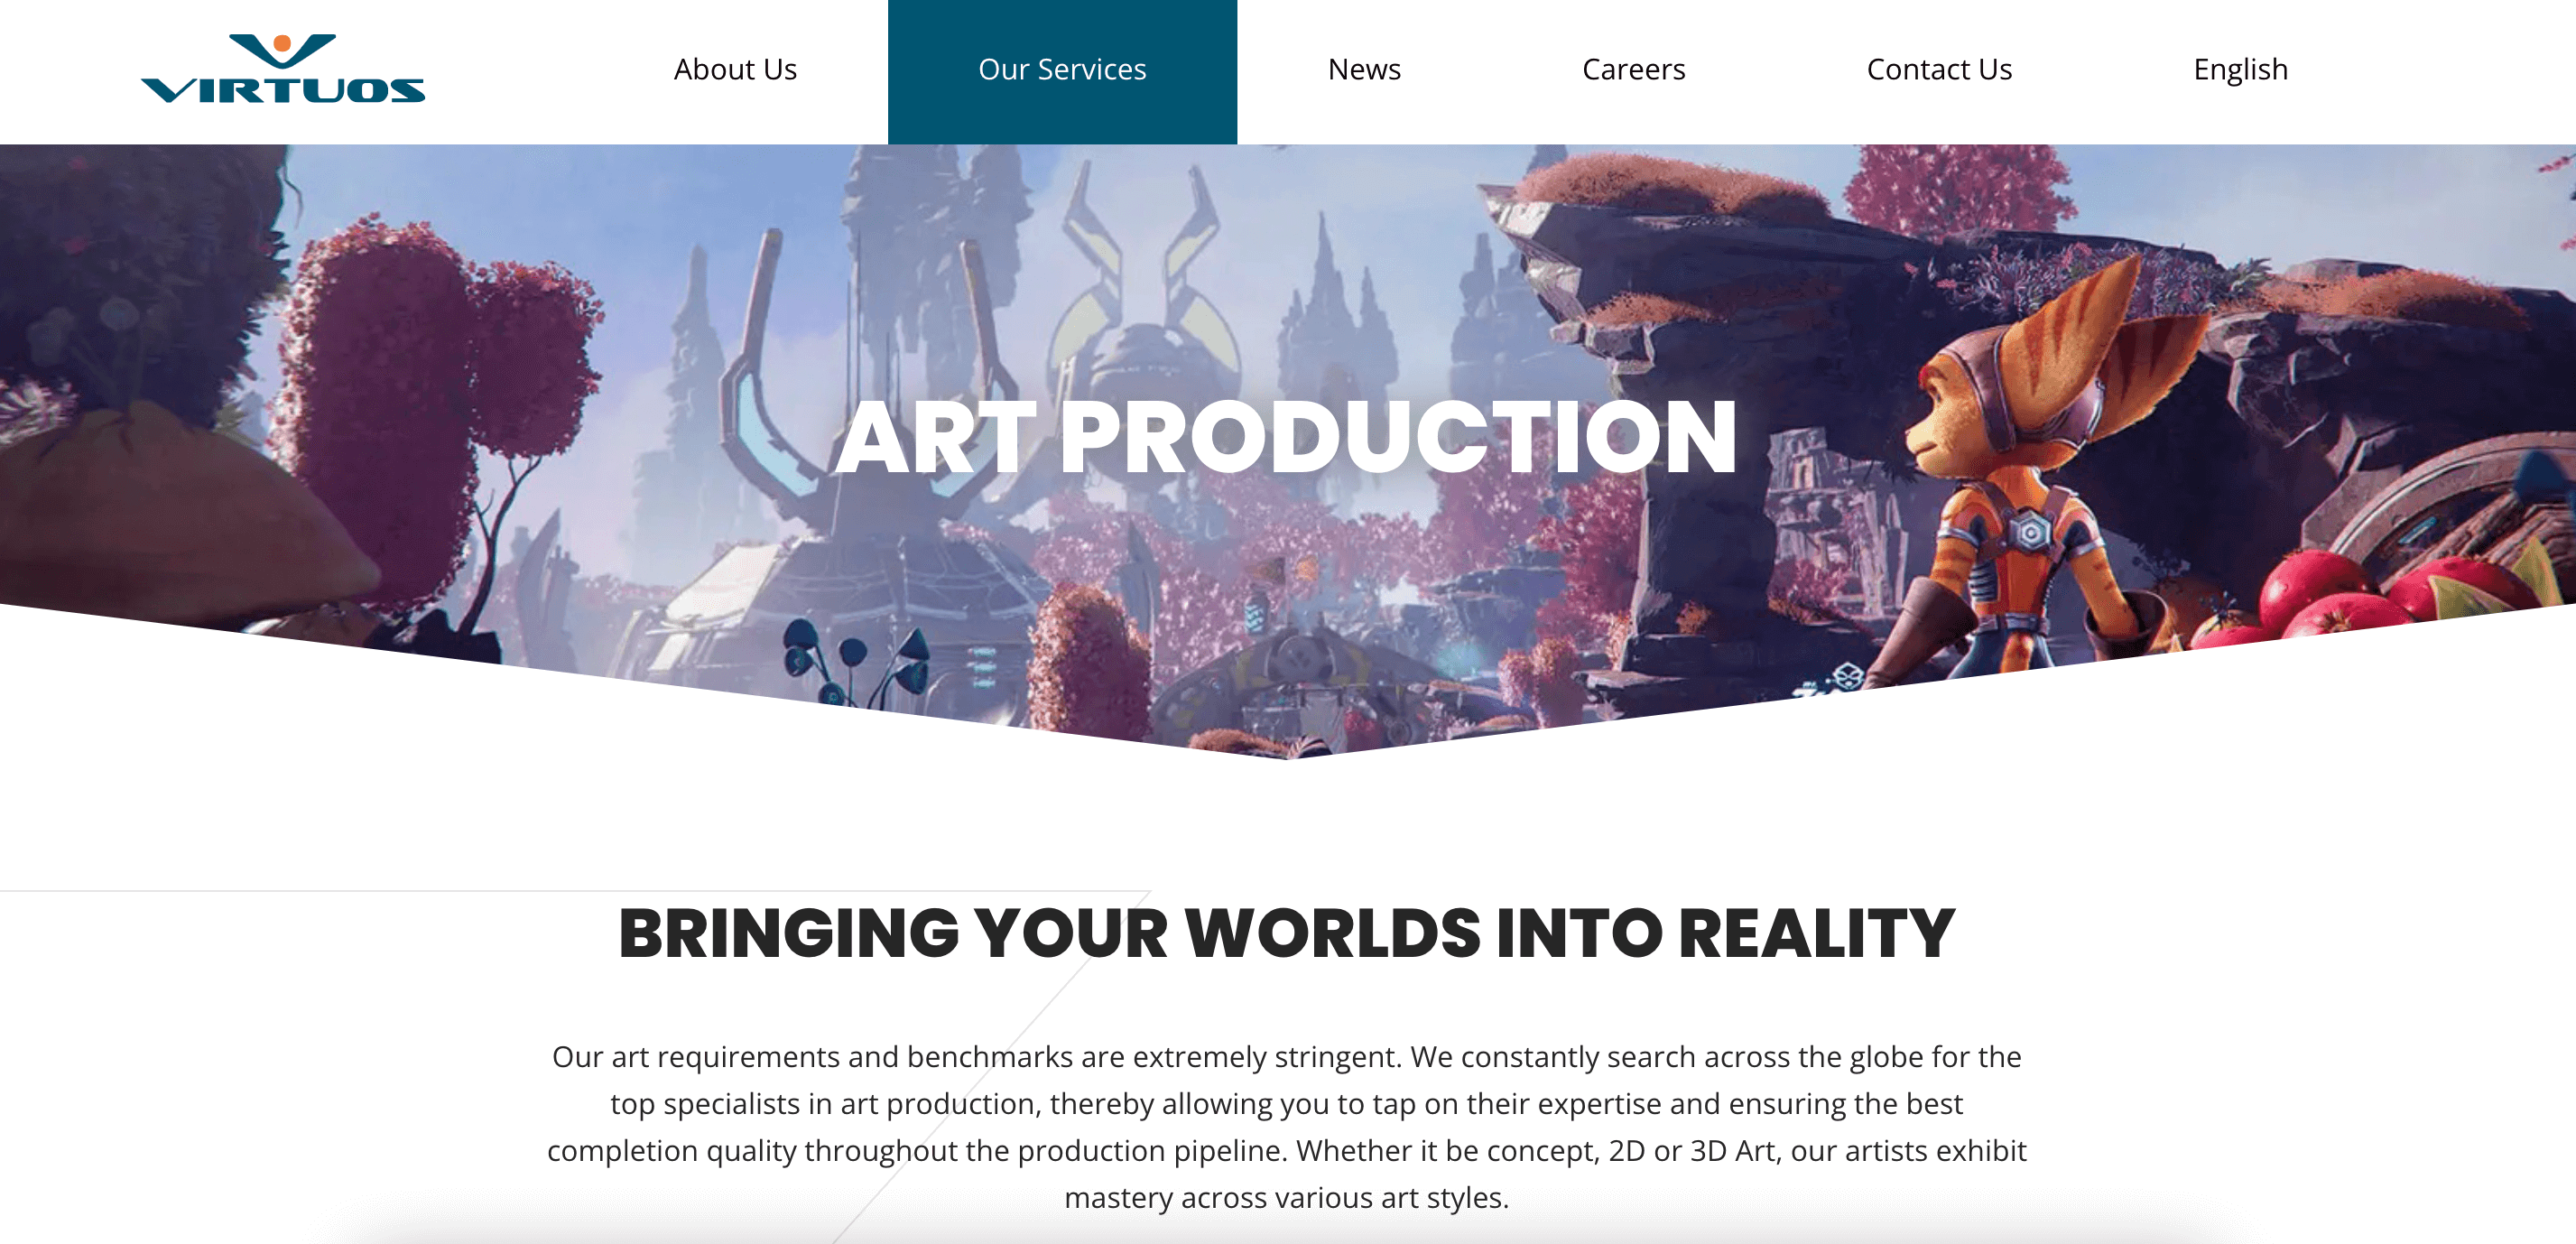 Top Game Art Outsourcing Companies